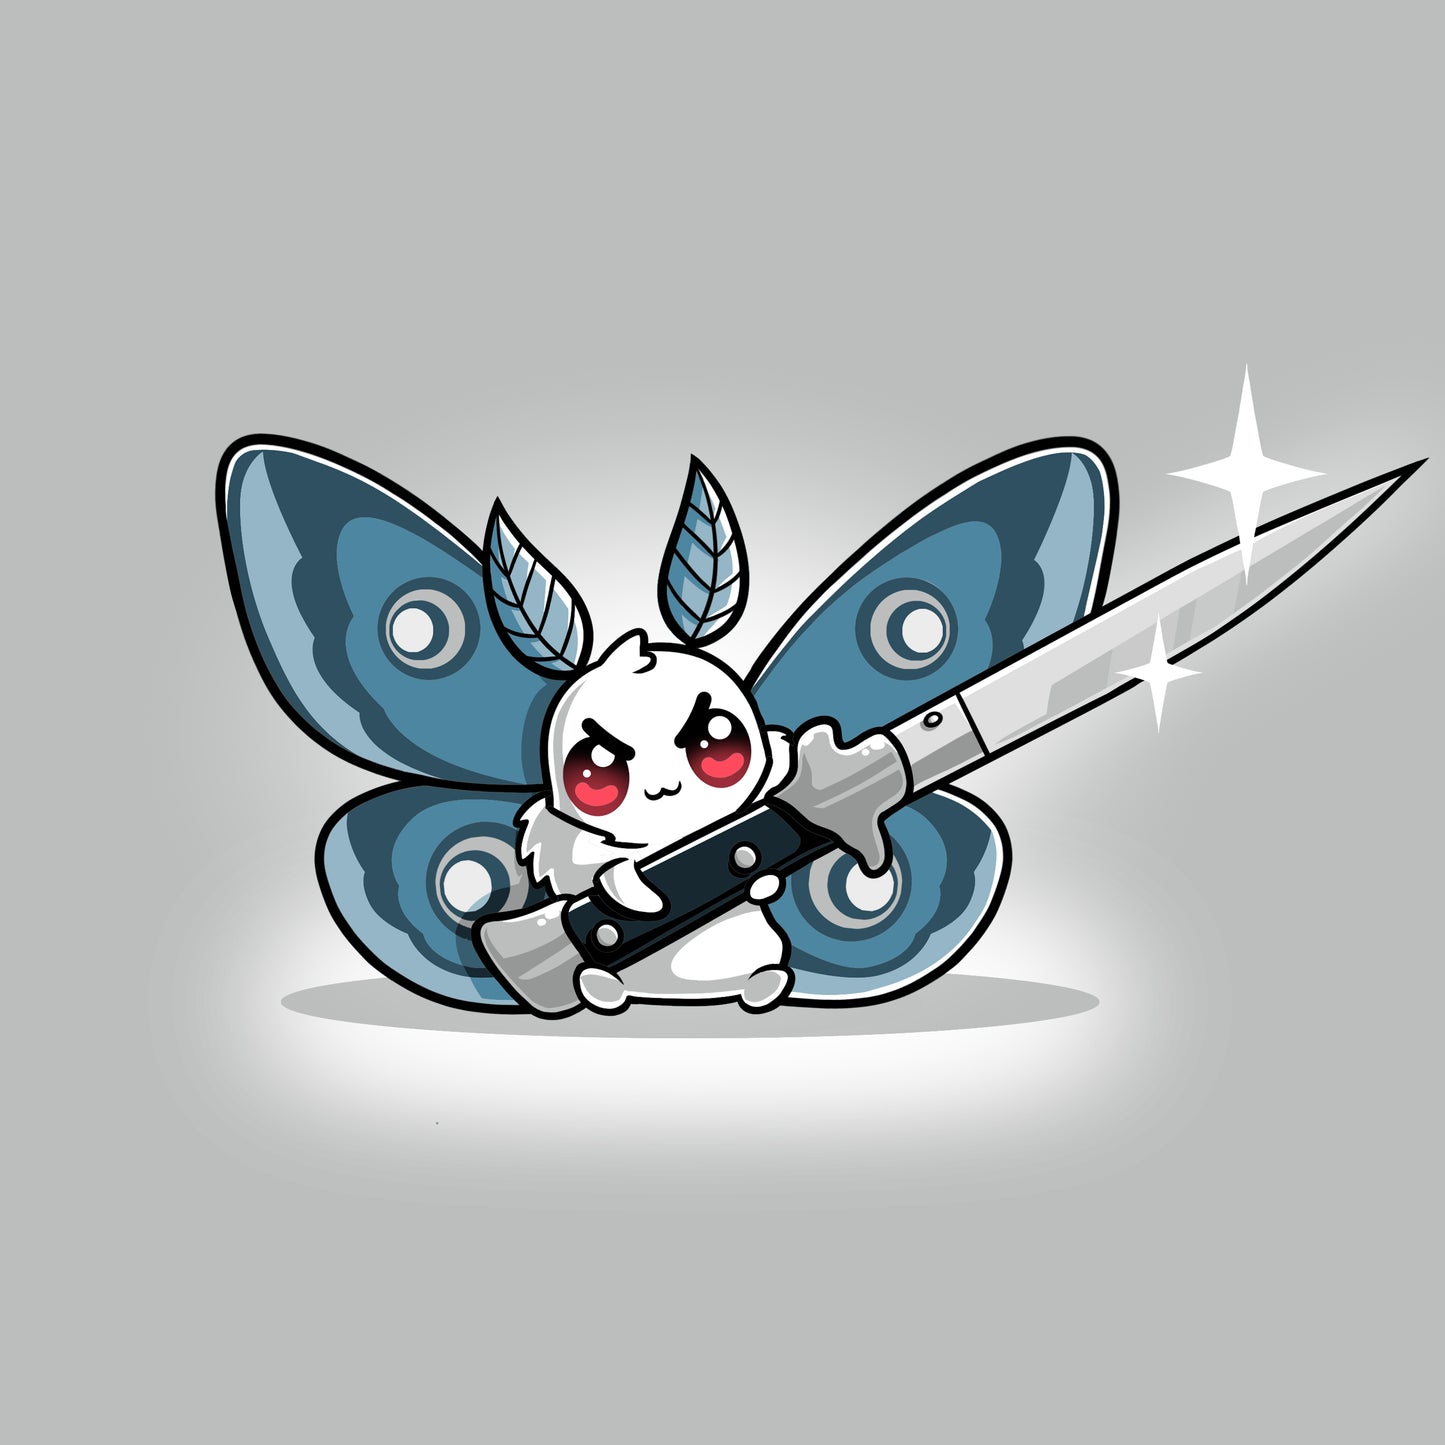 A Deadly Moth cartoon butterfly holding a sword on a gray background. Brand: TeeTurtle.